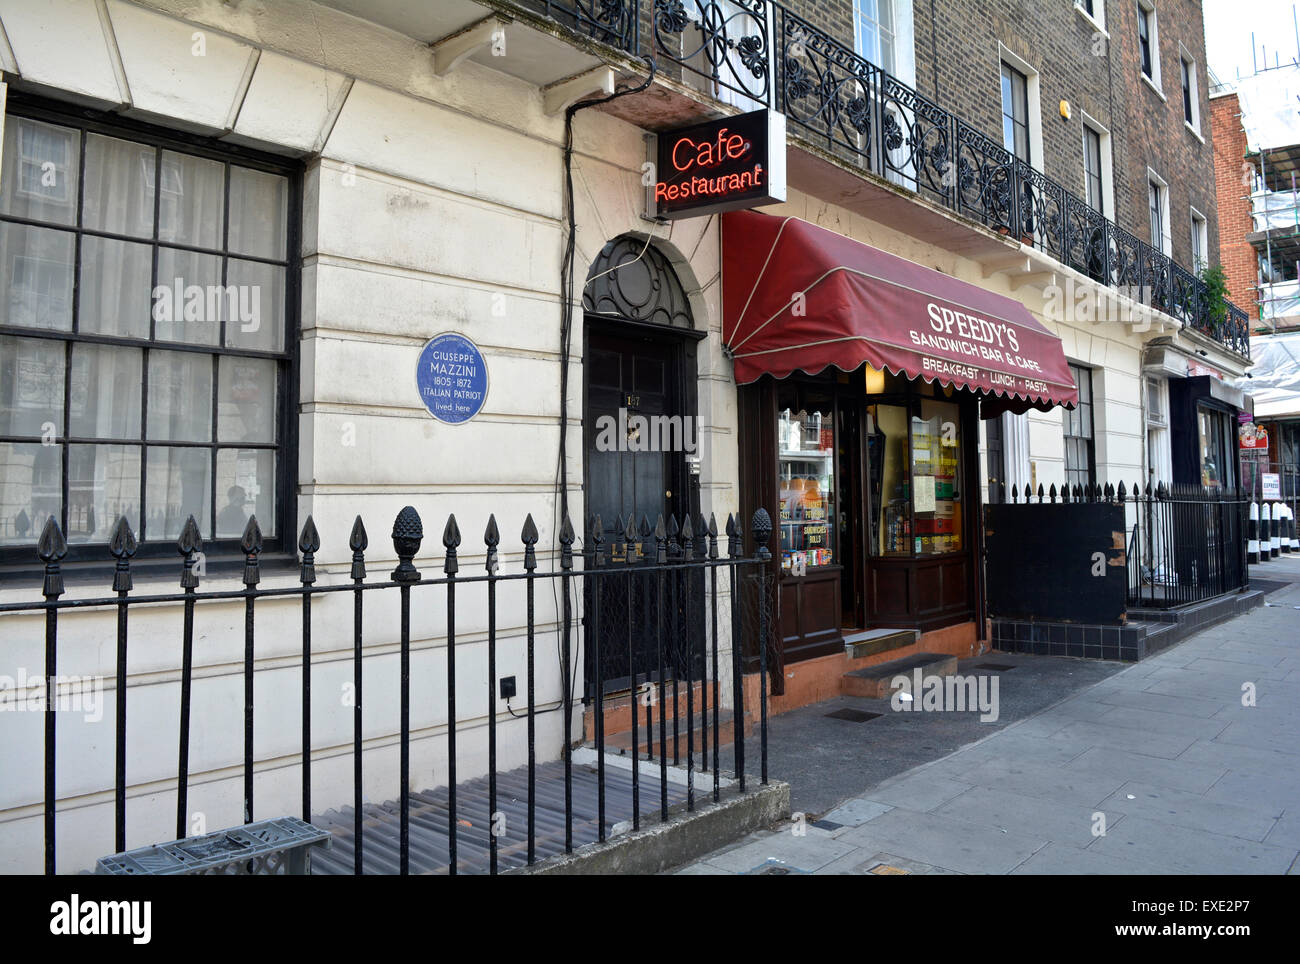 Speedy's Sandwich Bar and Cafe in Camden which recently featured in the BBC series Sherlock. Stock Photo